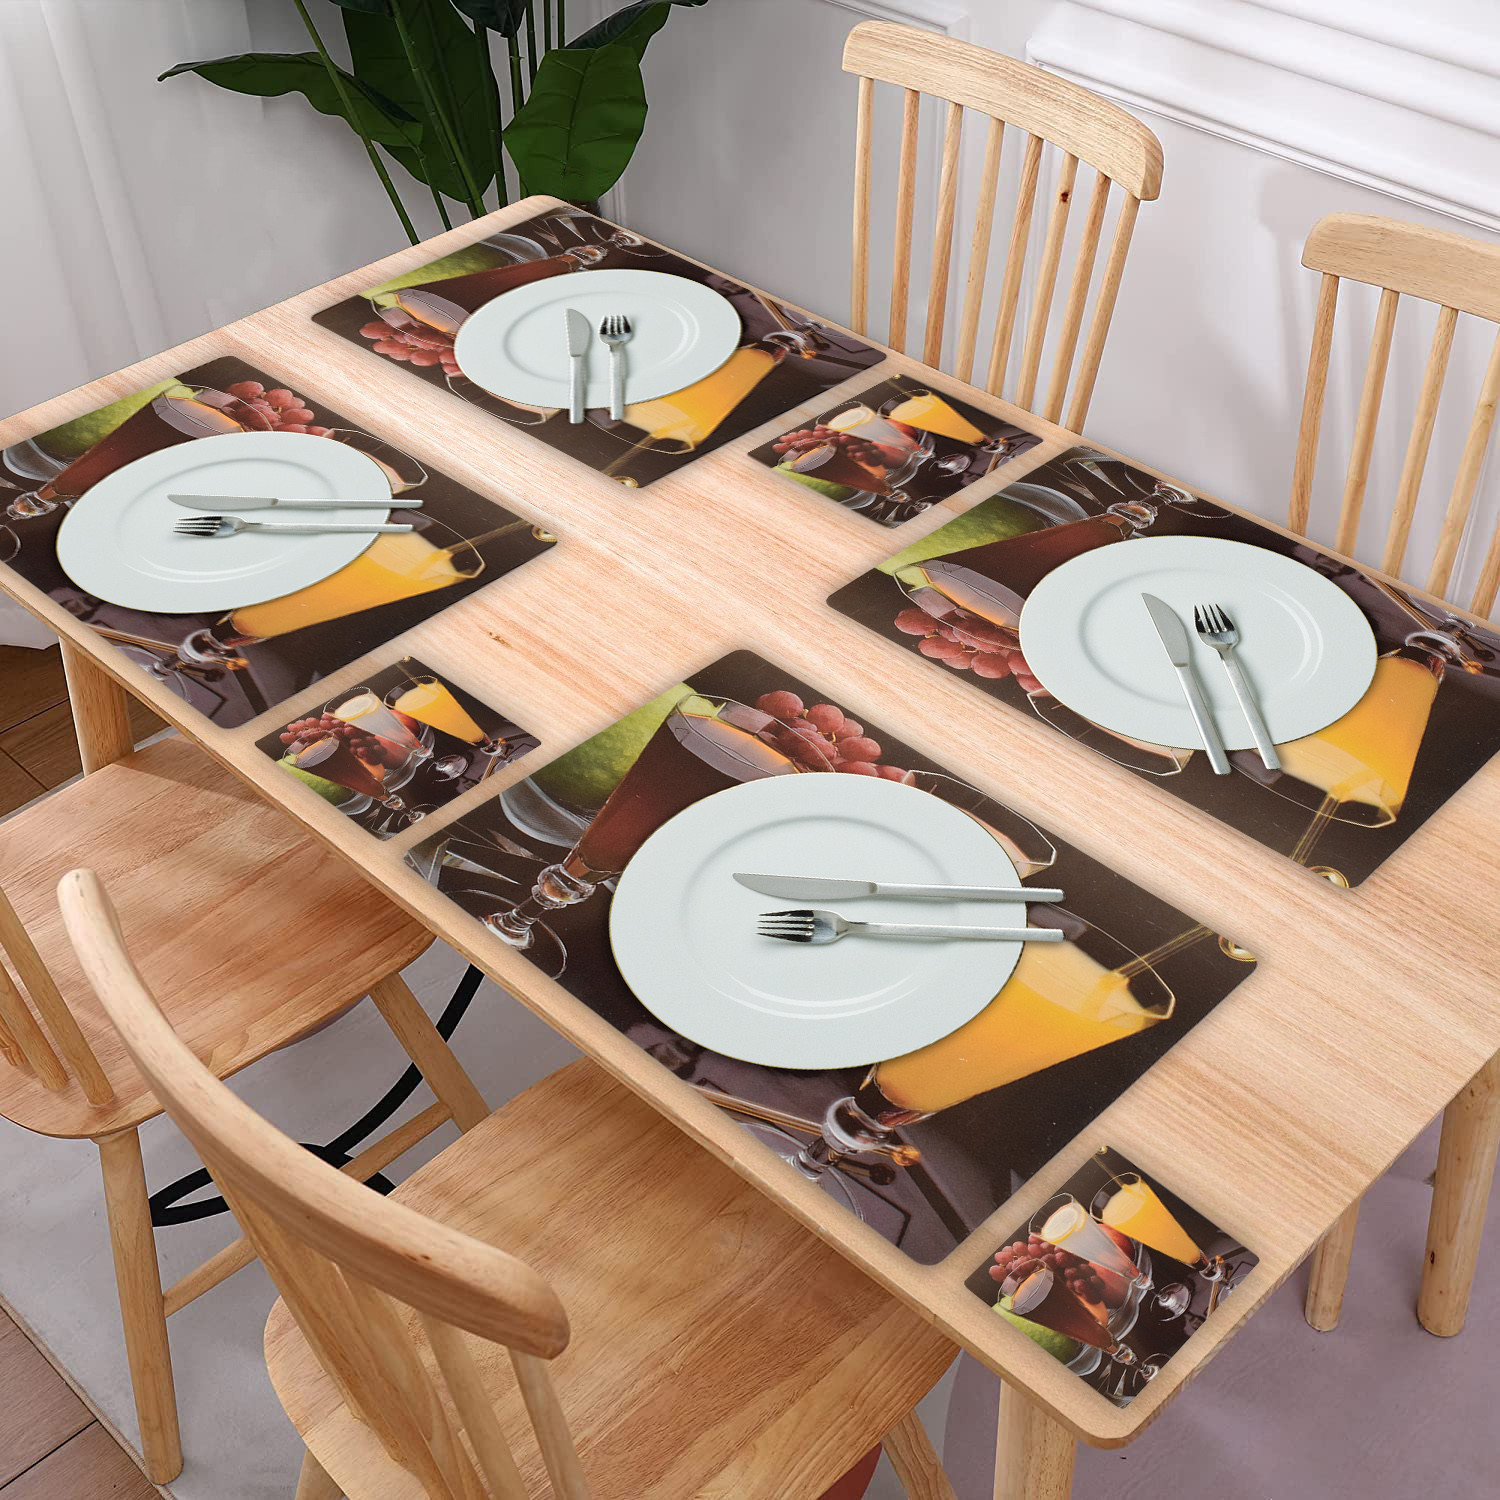 Kuber Industries Juice Glass Print PVC Table Mats /Placemat With 6 Coasters For kitchen, Dining Table Set of 6 (Brown) 54KM4380